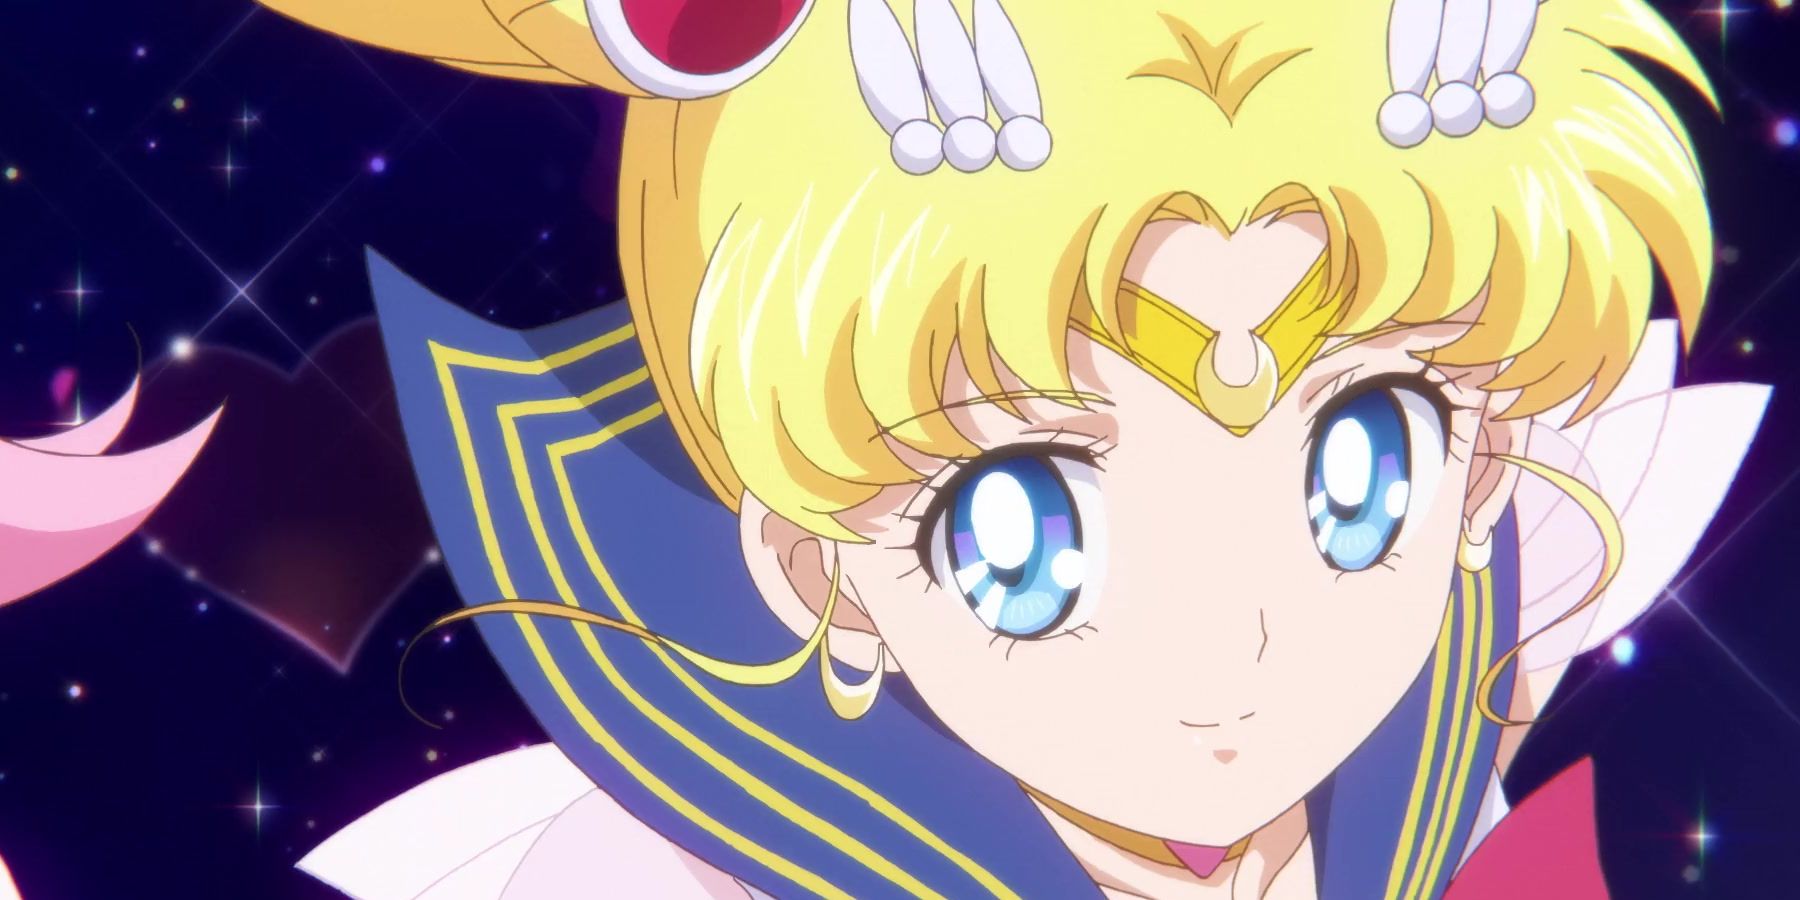 Sailor Moon smiling during her transformation in Sailor Moon Eternal